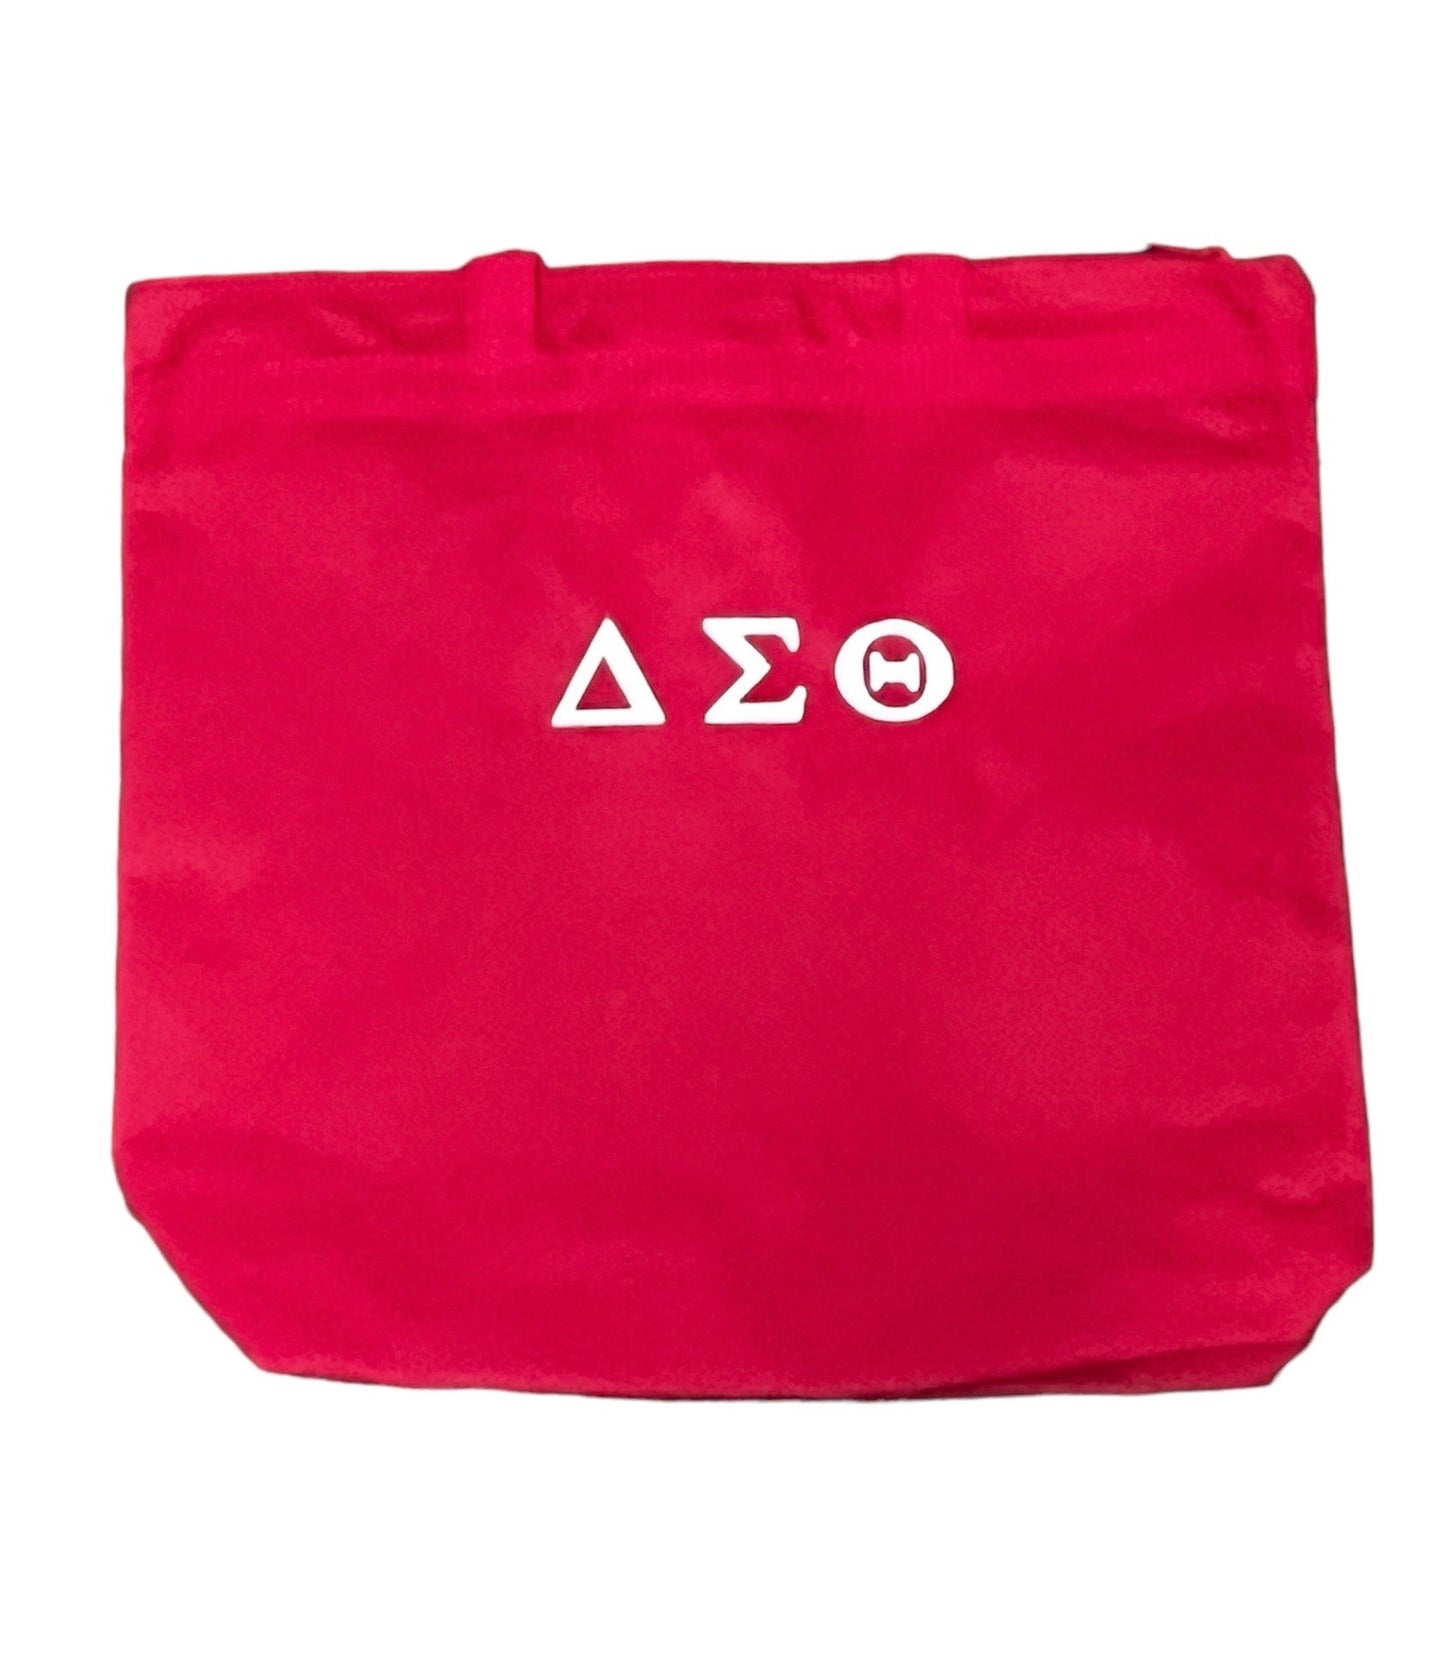 Delta Sigma Theta, Delta 1913 red Logo bag with glitter design and logo on opposite side